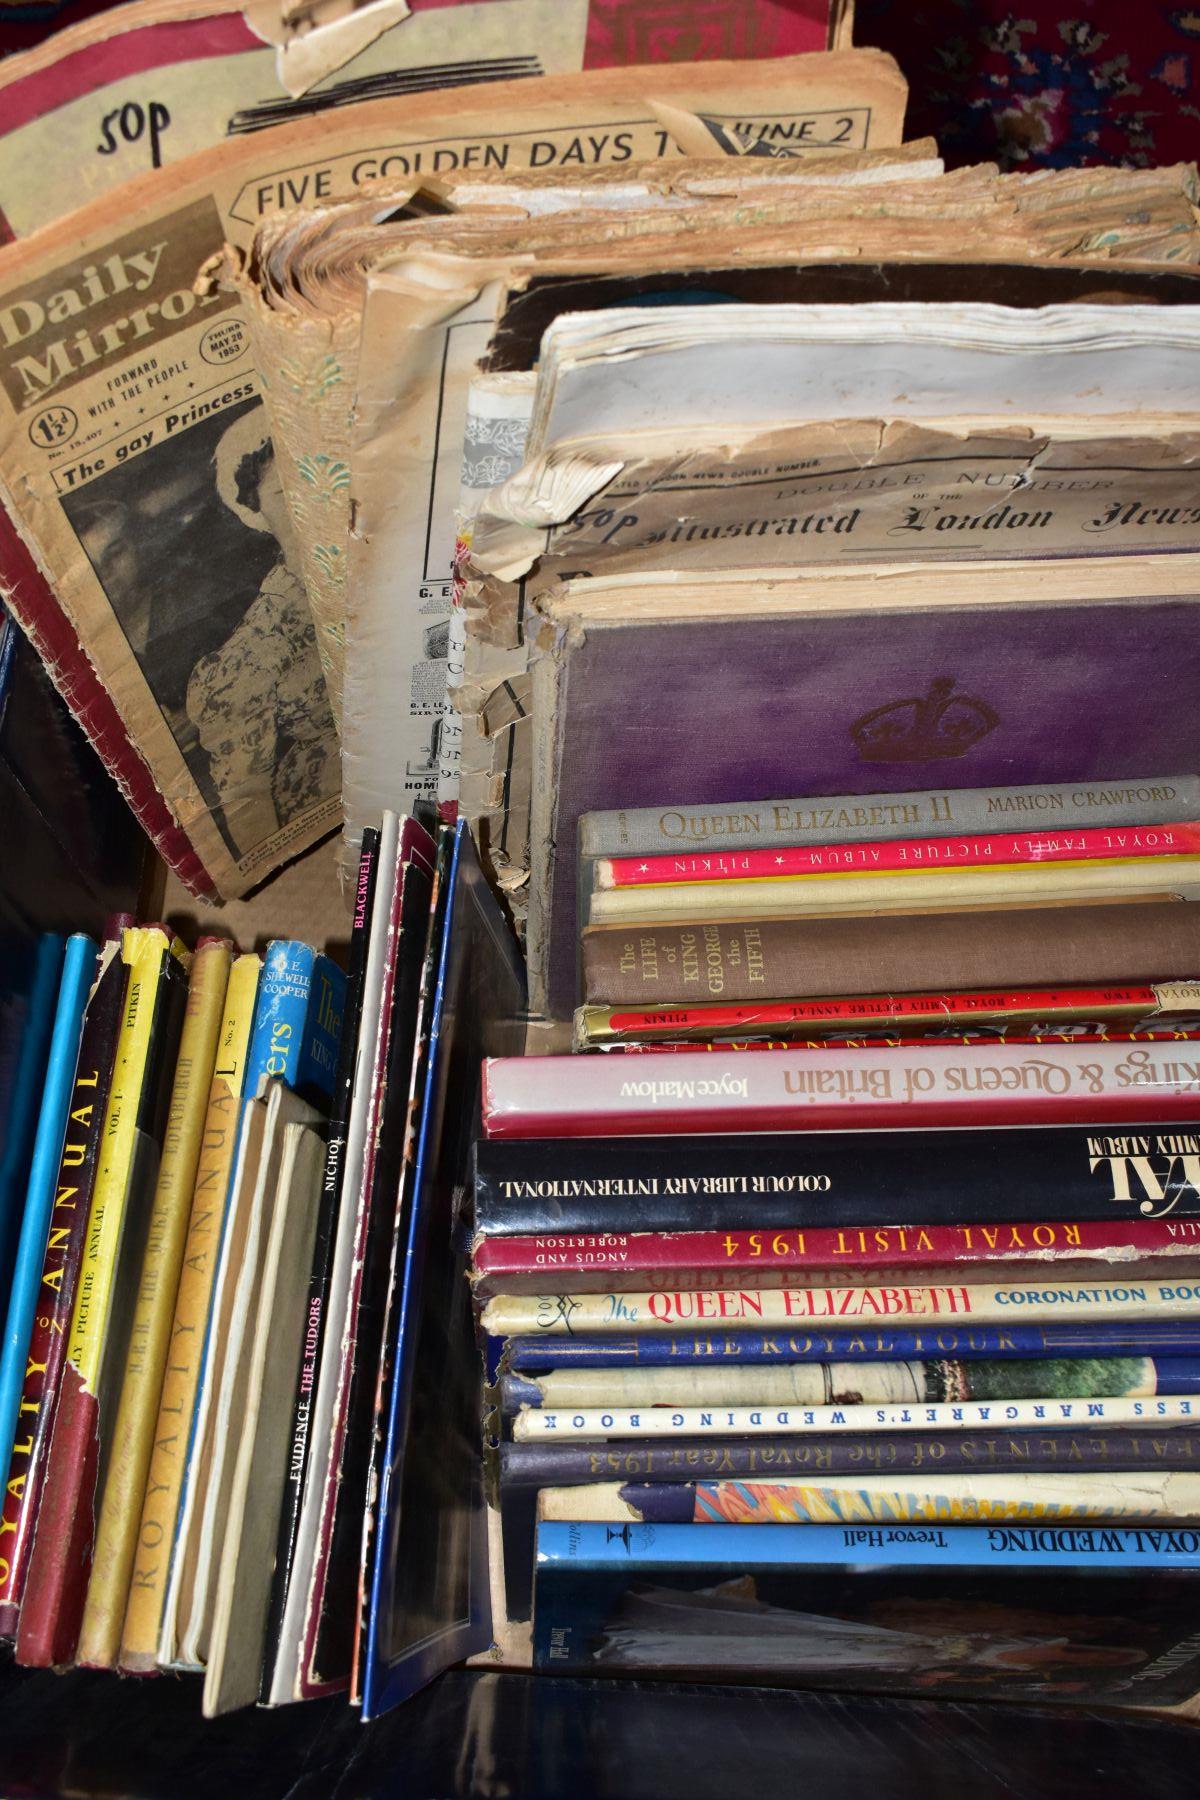 ROYAL EPHEMERA, a collection of books, early 20th century news publications and a scrapbook relating